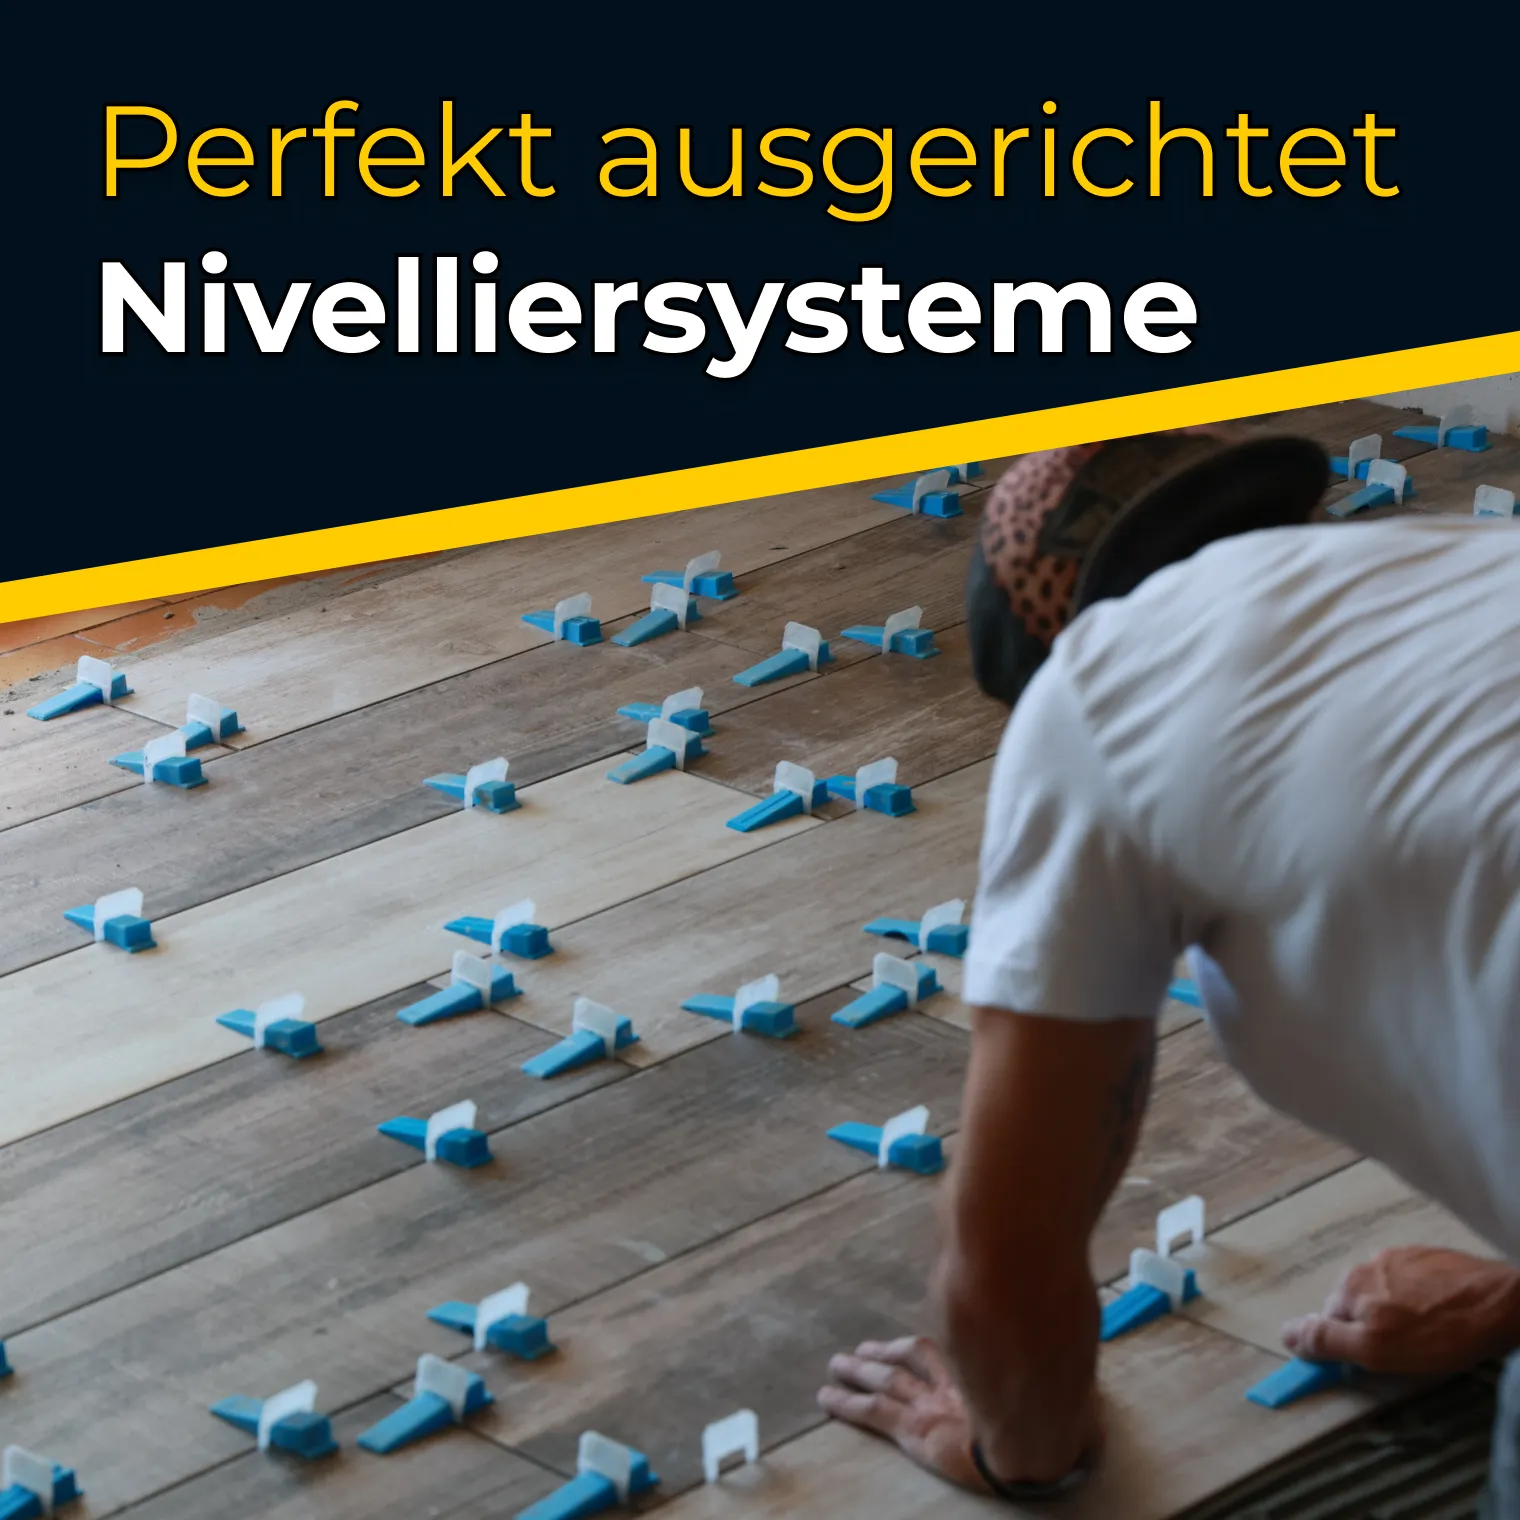 Nivelliersysteme